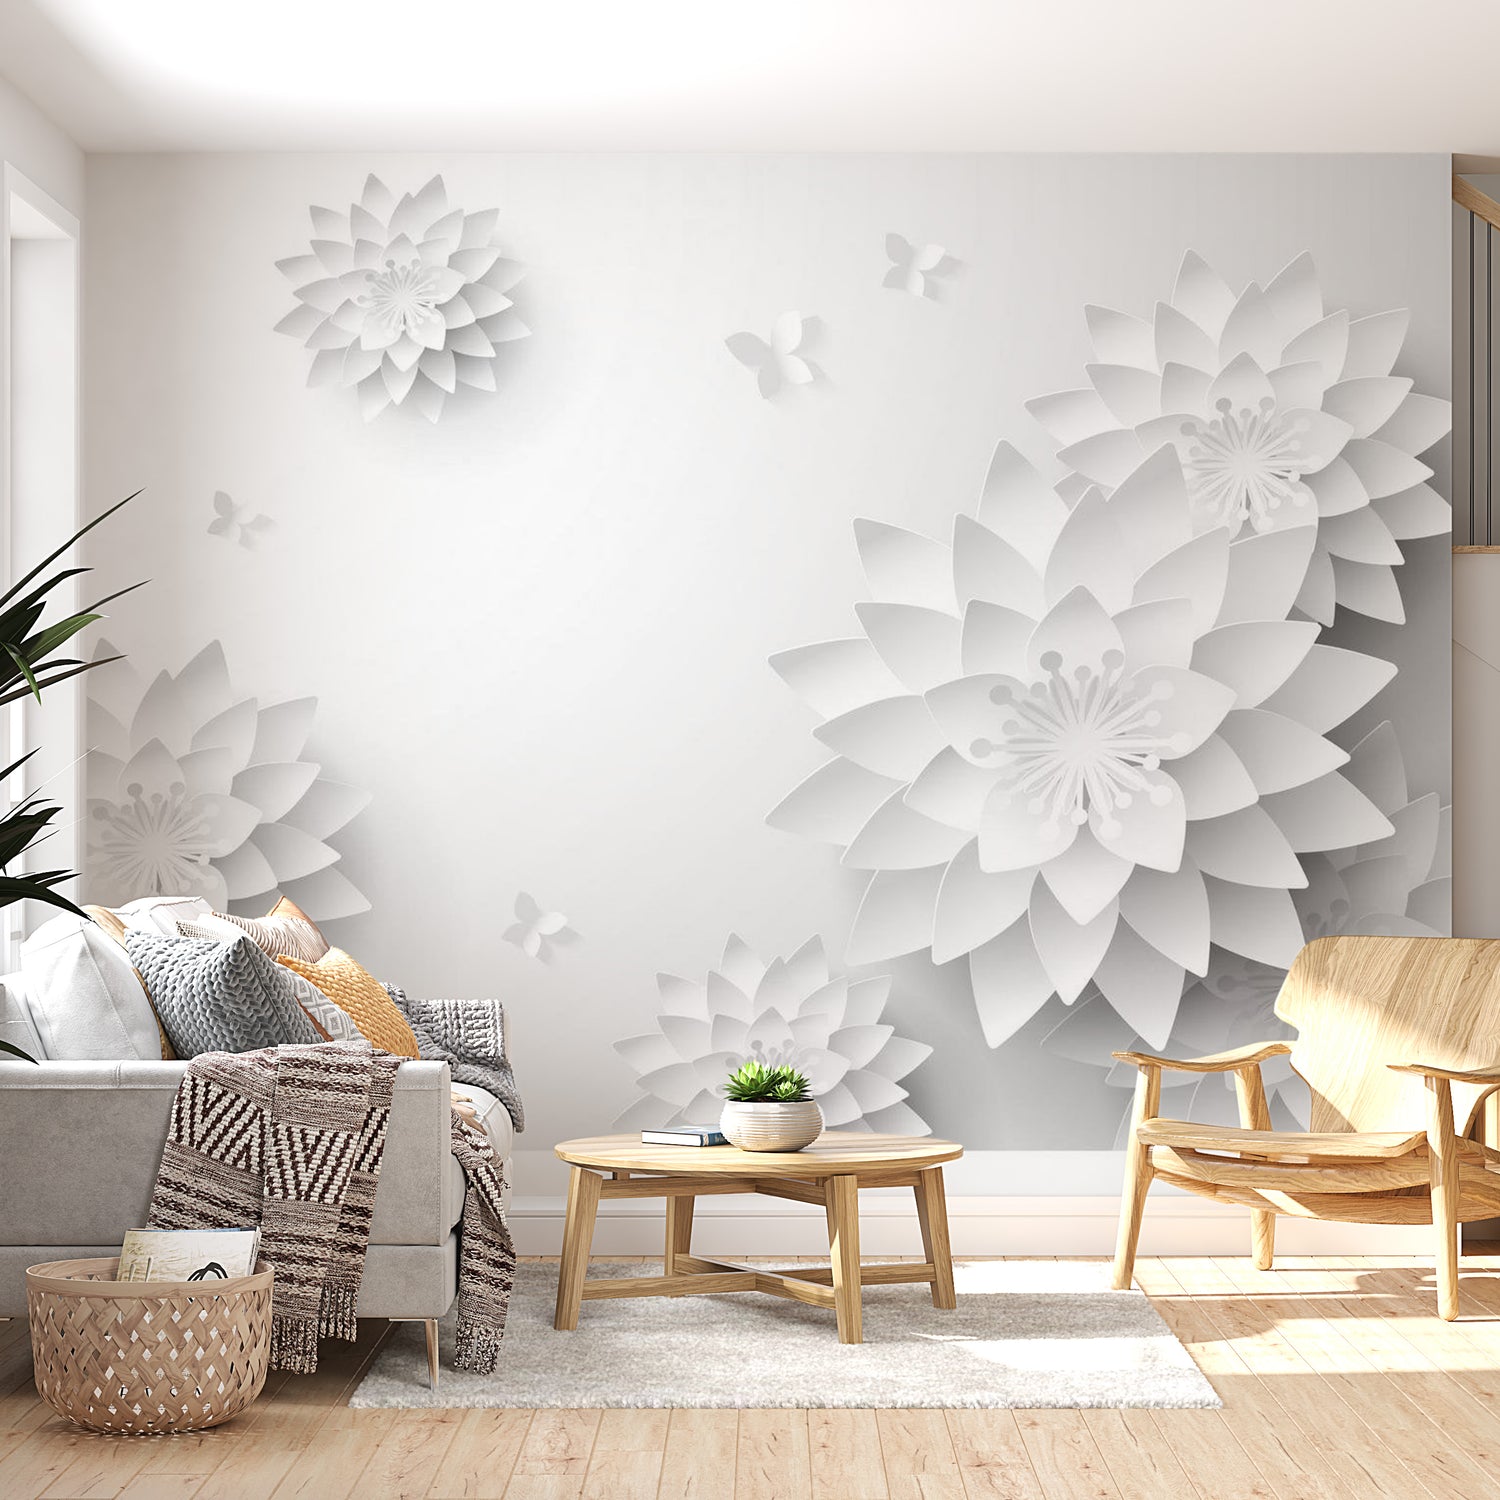 Peel & Stick Floral Wall Mural - Oriental Flowers - Removable Wall Decals